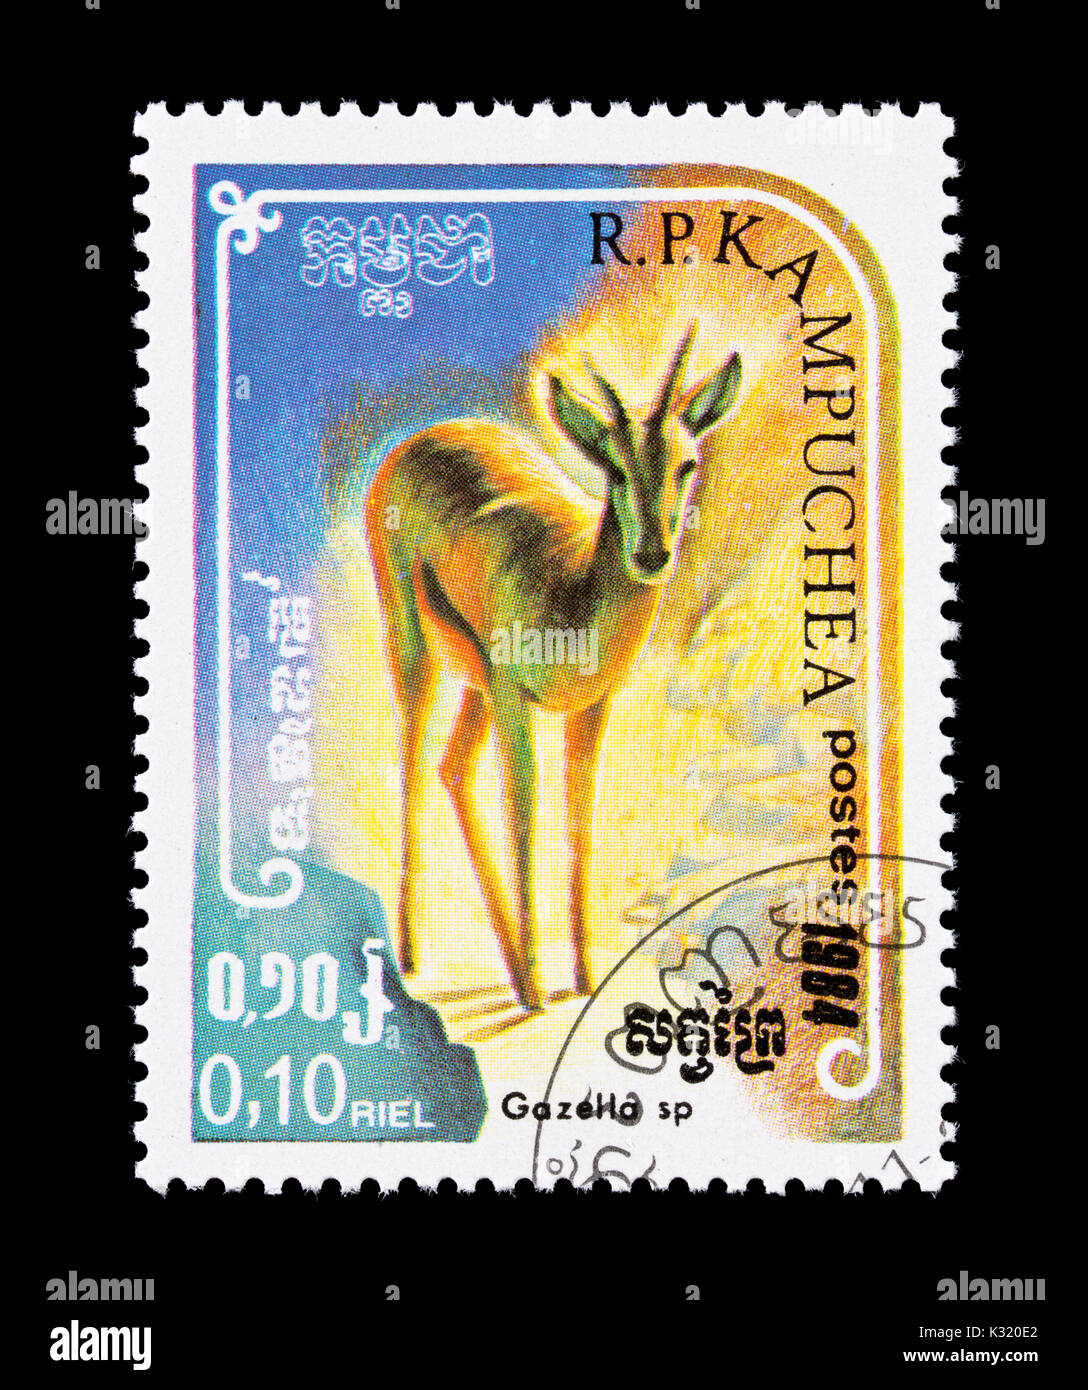 Postage stamp from Cambodia (Kampuchea) depicting an antelope. Stock Photo